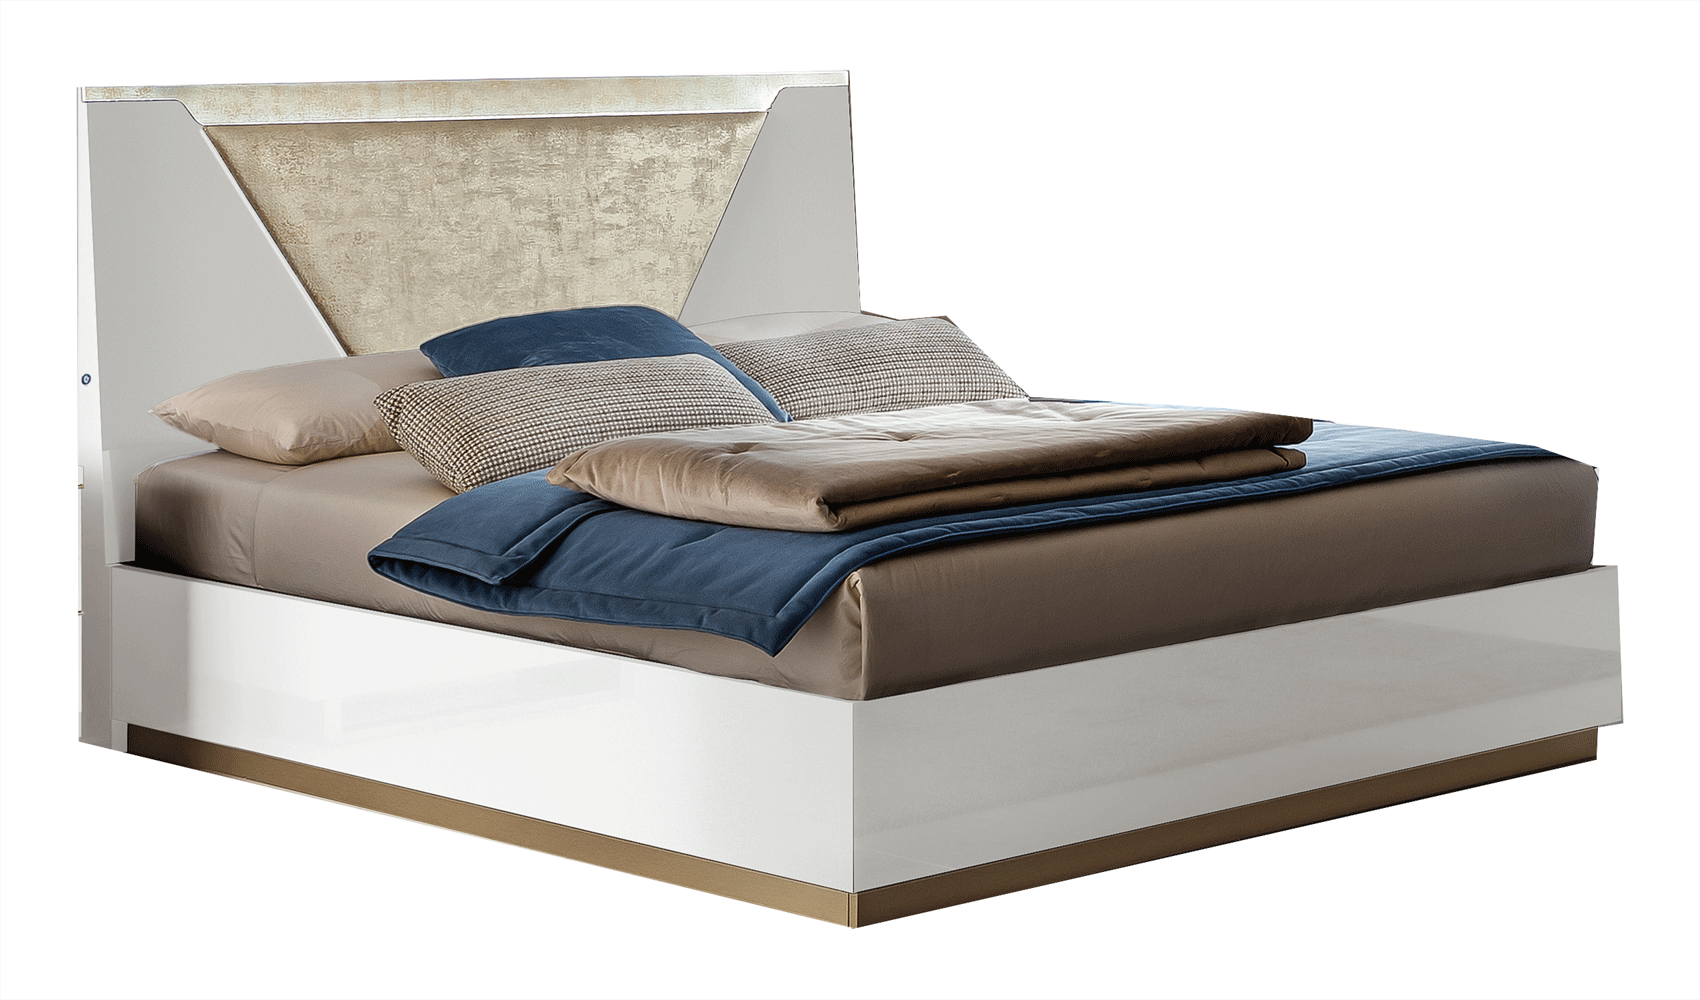 Brands Camel Modern Living Rooms, Italy Smart Bed White